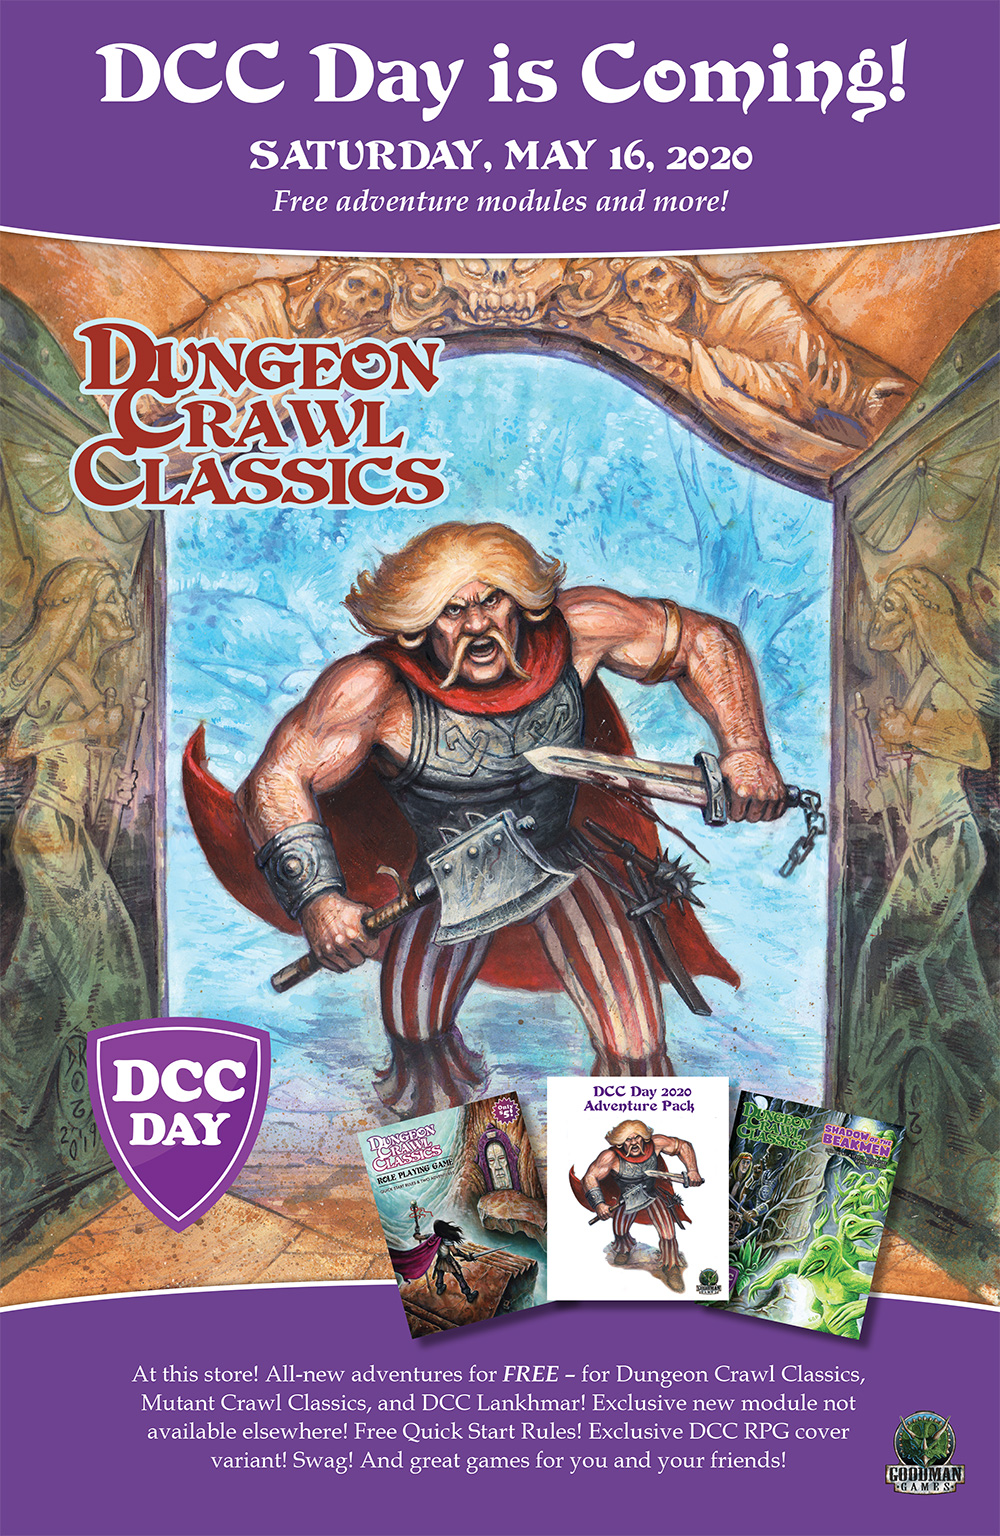 DCC Day Is Coming In May!Goodman Games